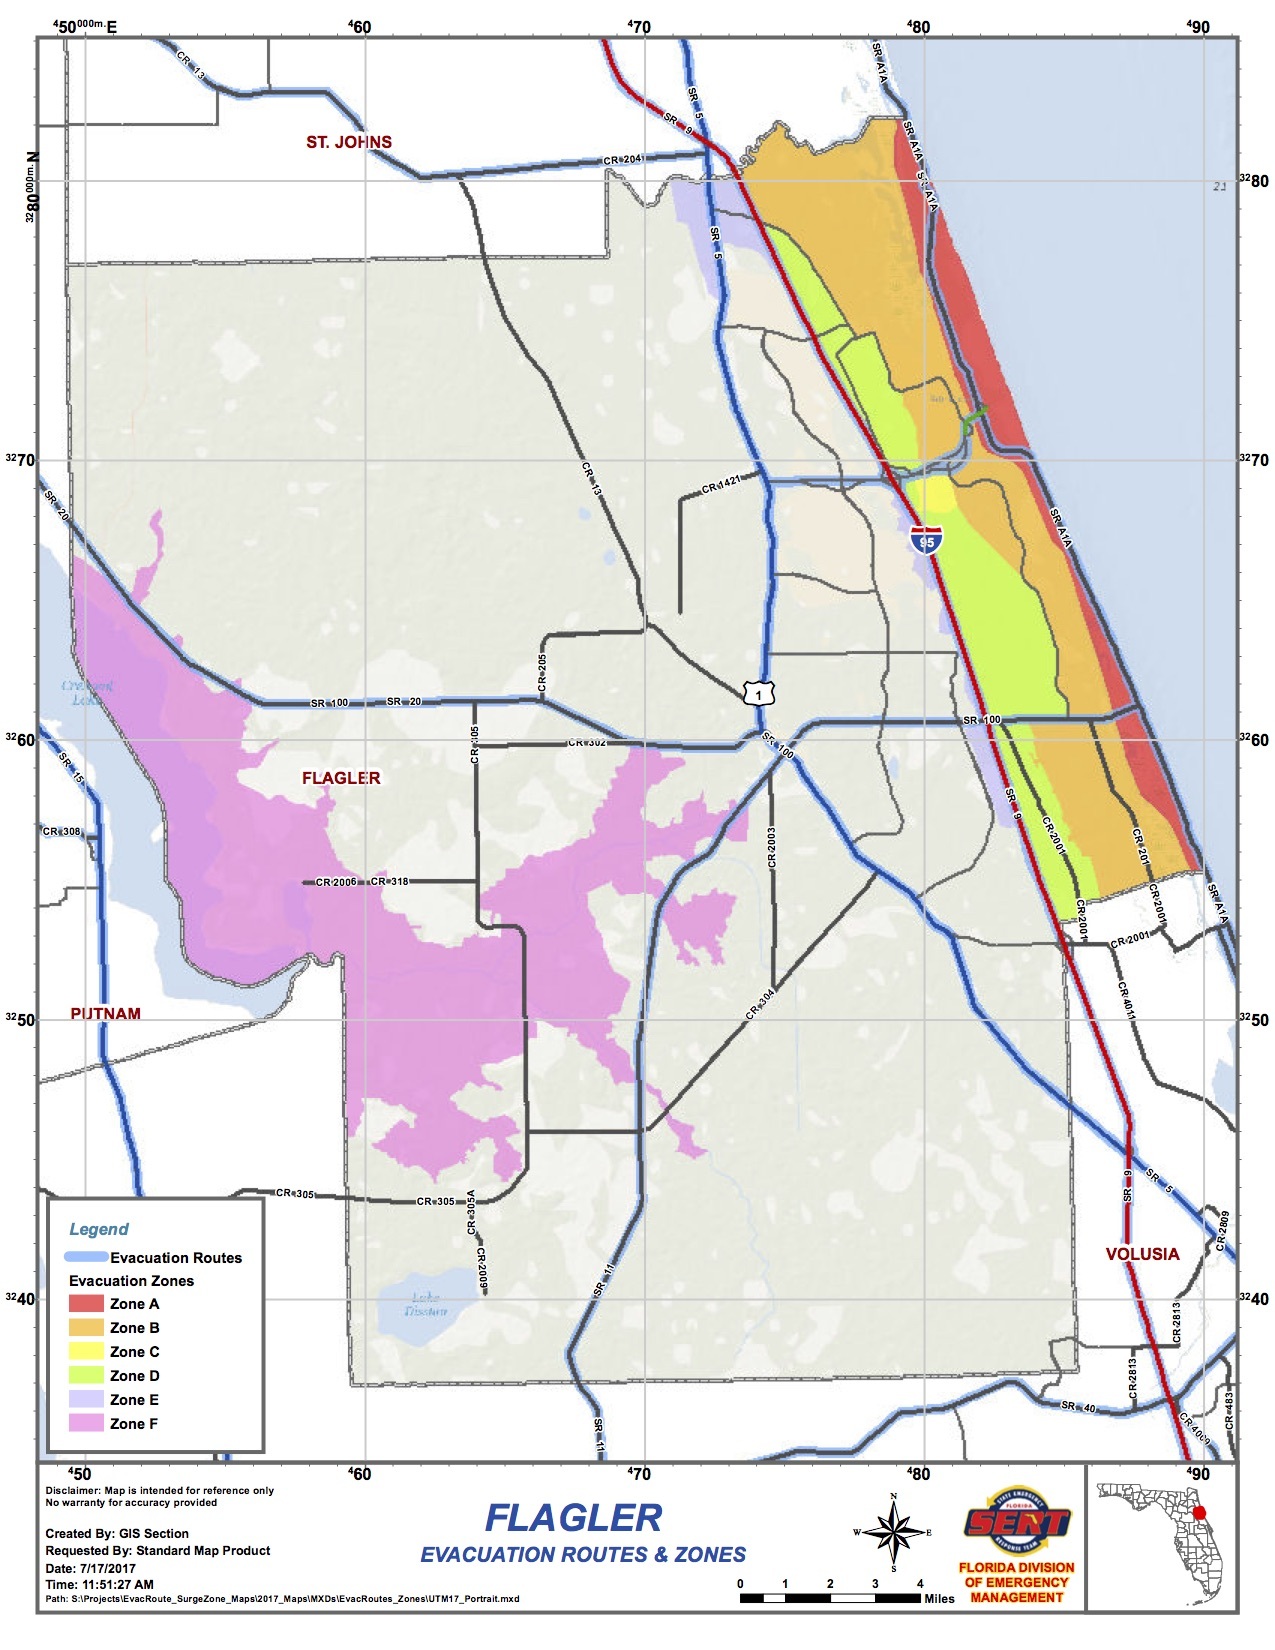 Evacuation zone A is red on the map and includes everything east of the Intracoastal including Marineland, Hammock and Flagler Beach along A1A.